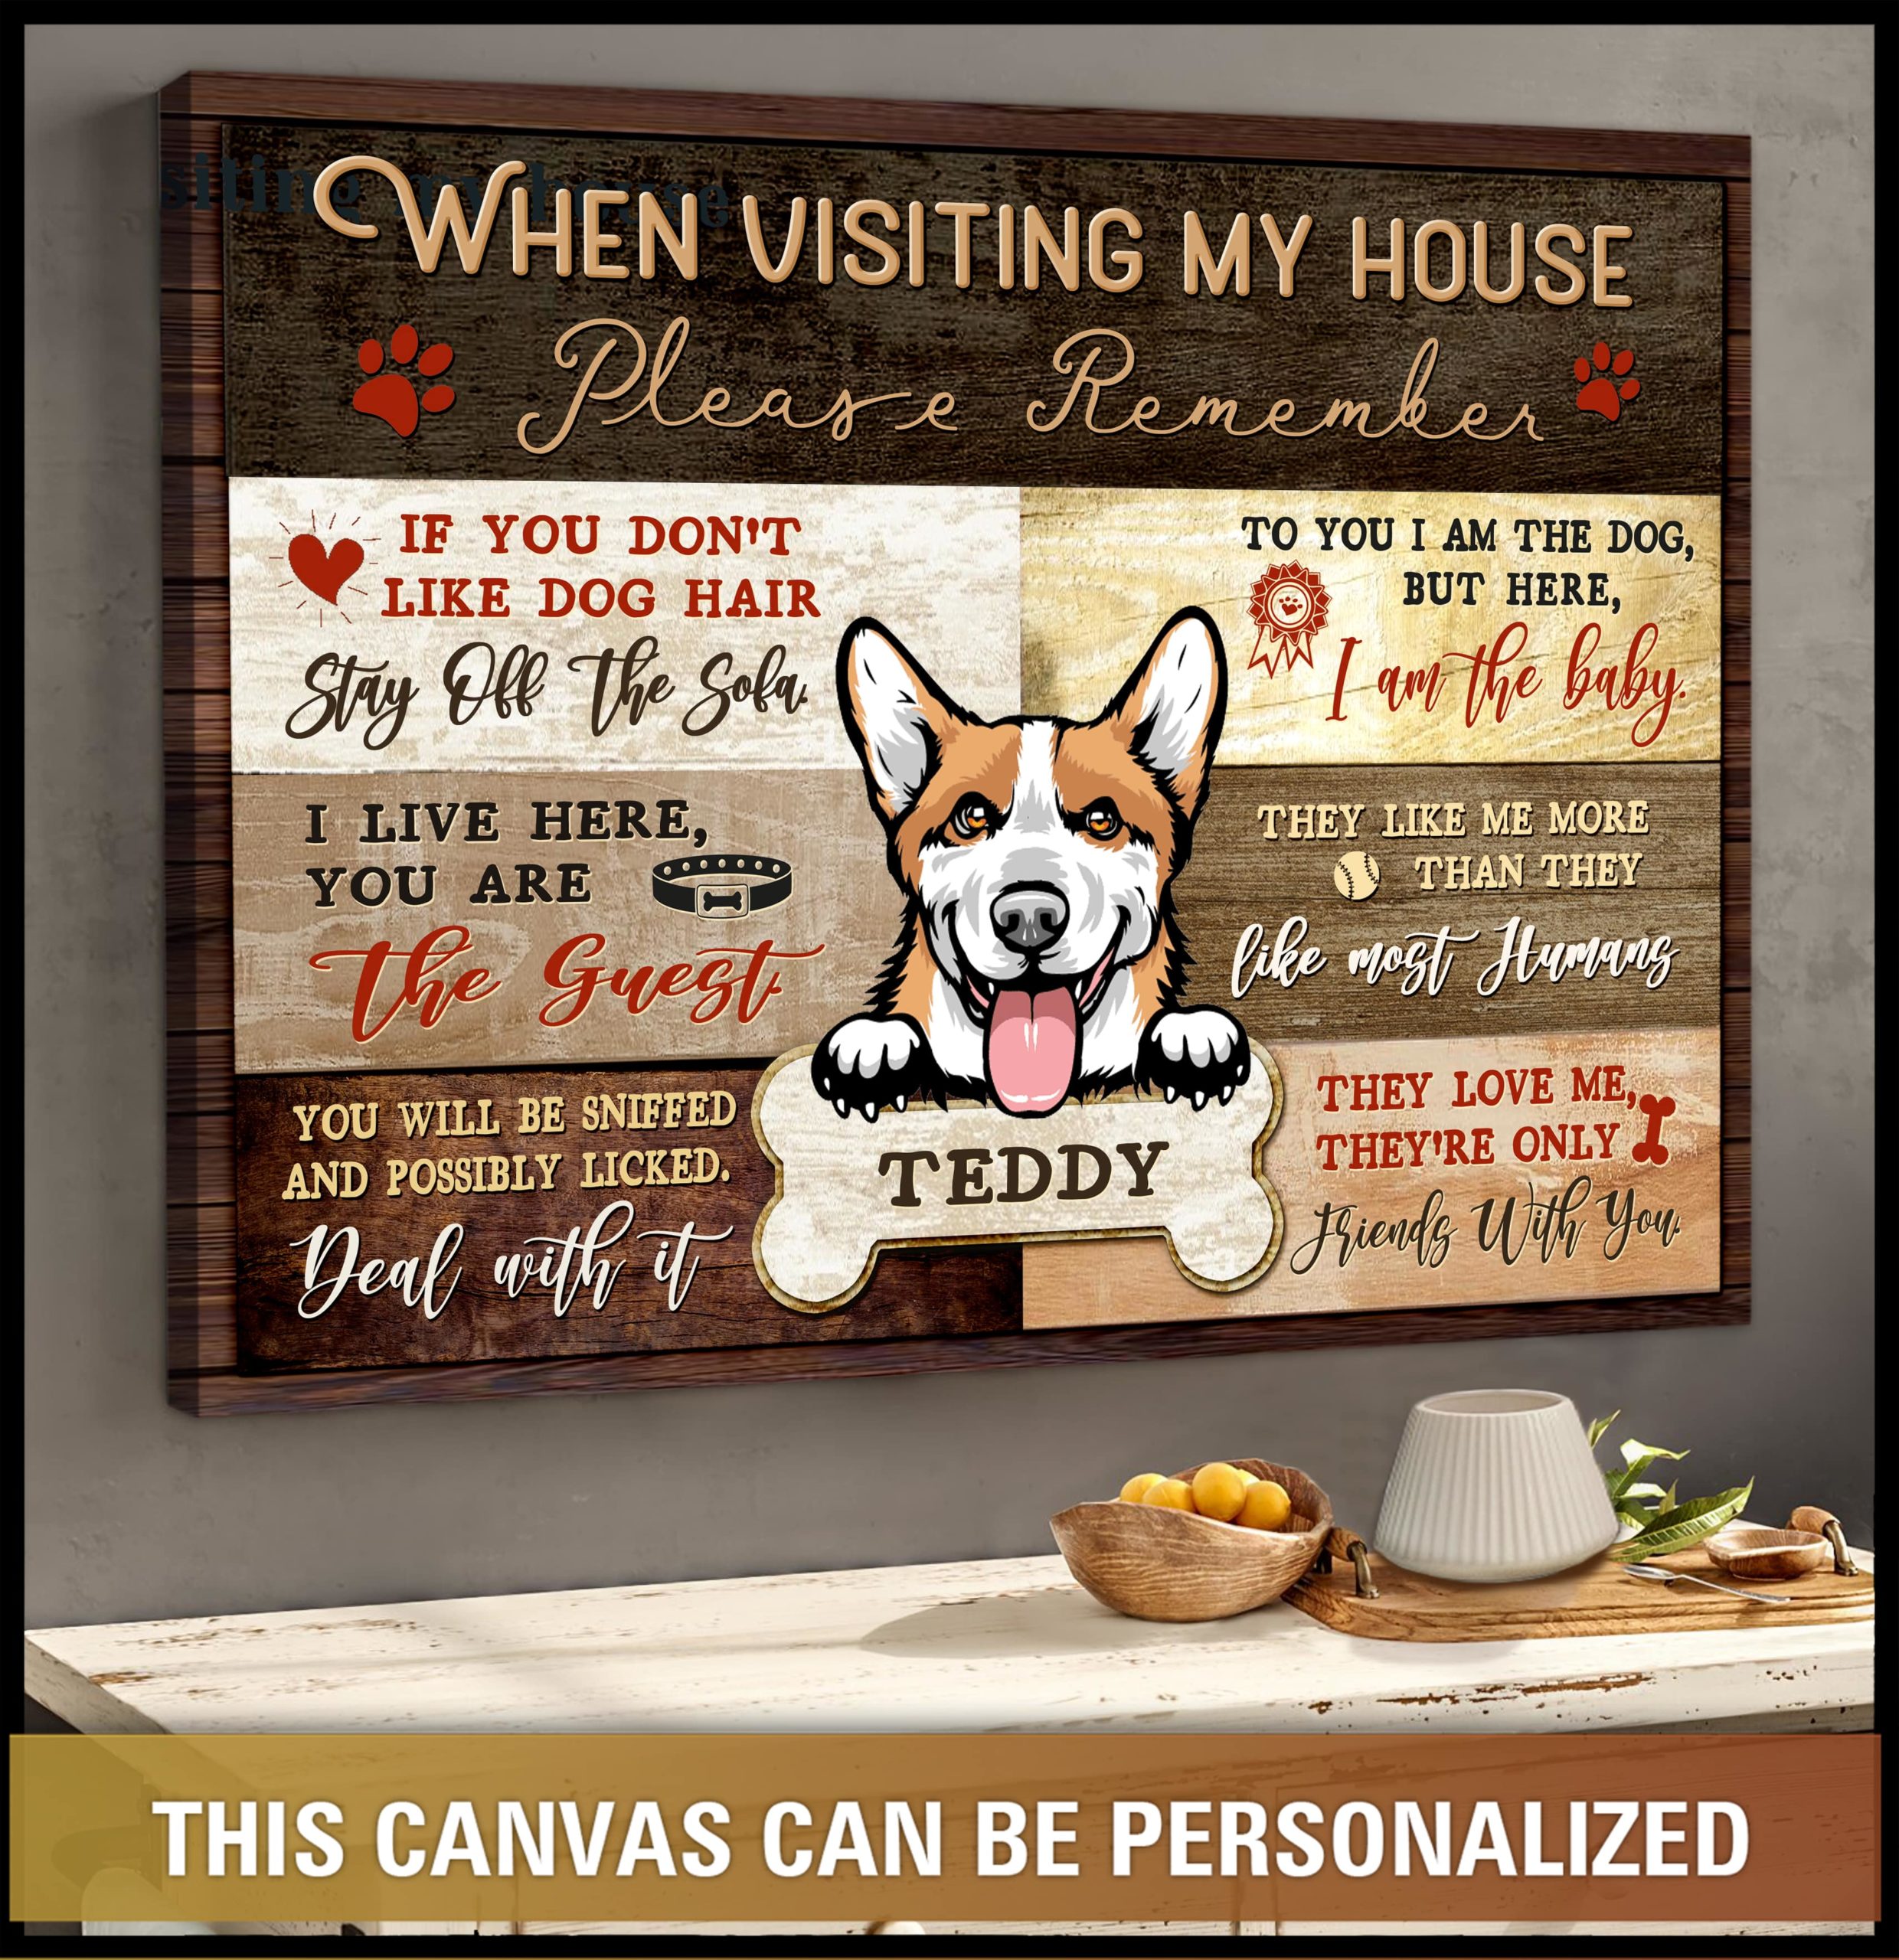 https://images.ohcanvas.com/ohcanvas_com/2022/08/12022450/funny-pet-portrait-canvas-custom-dog-gifts-for-owners-when-visiting-my-house-scaled.jpg